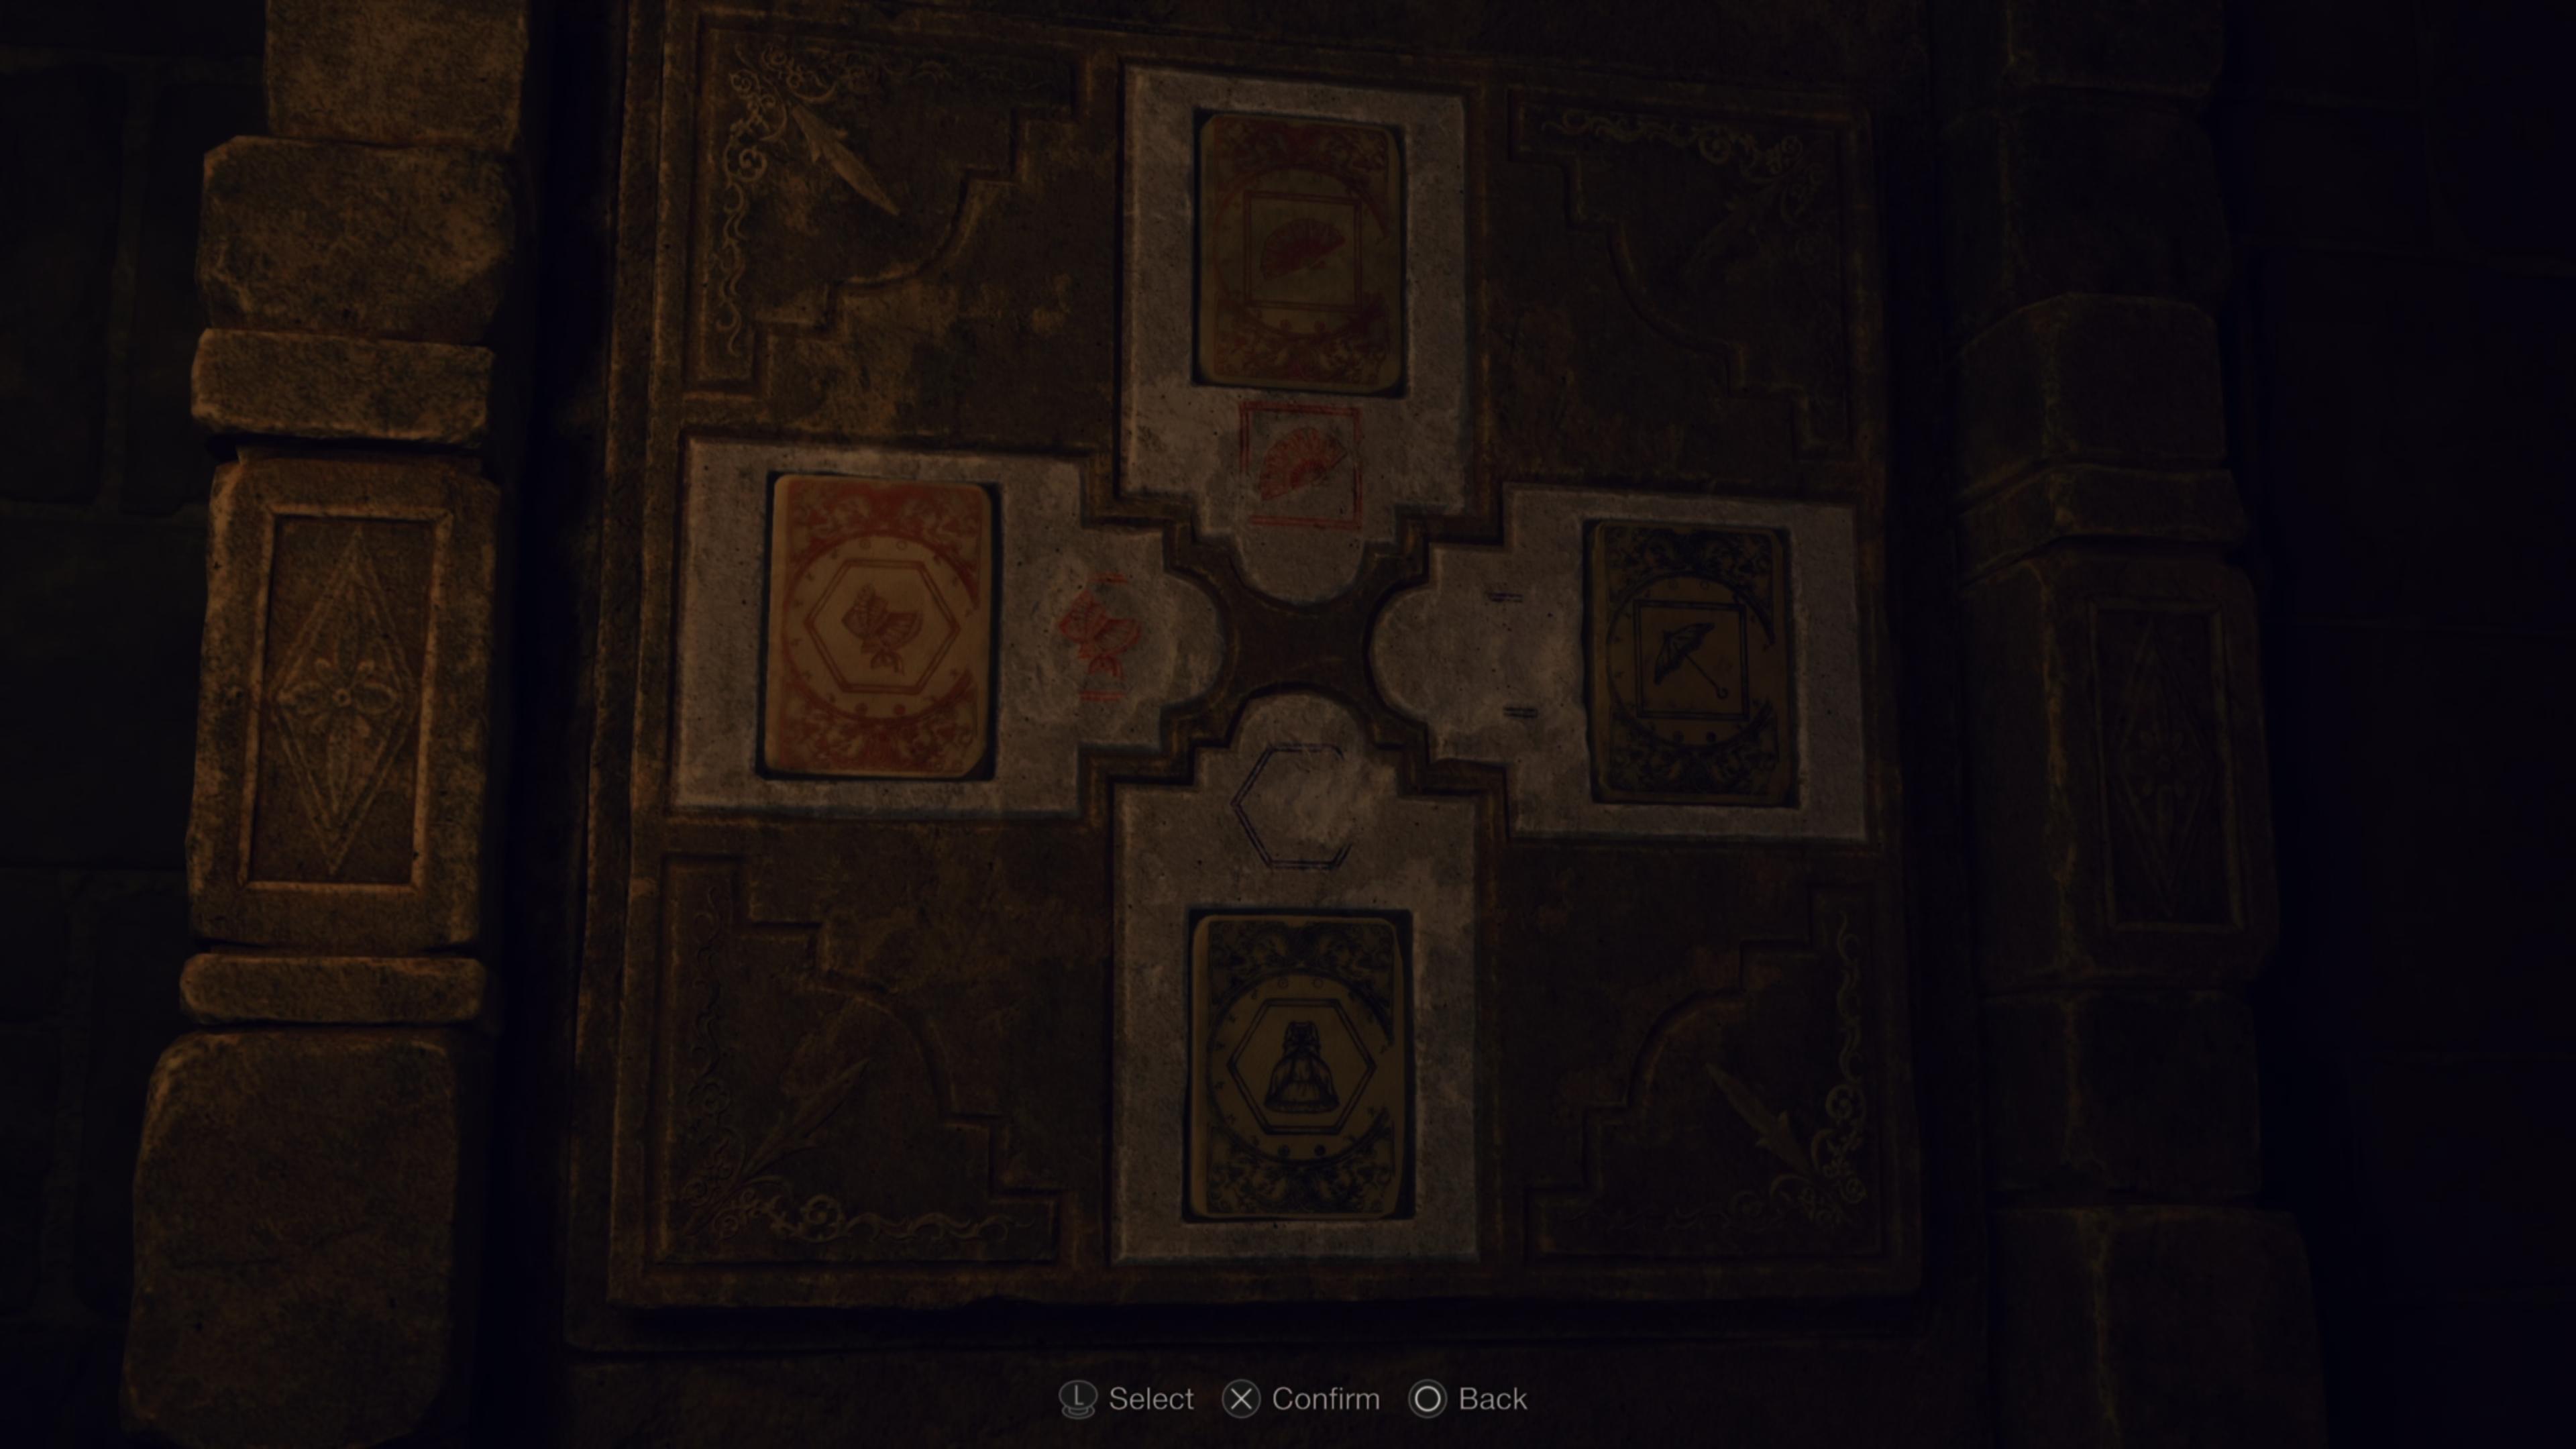 All Resident Evil 4 Remake power puzzle solutions